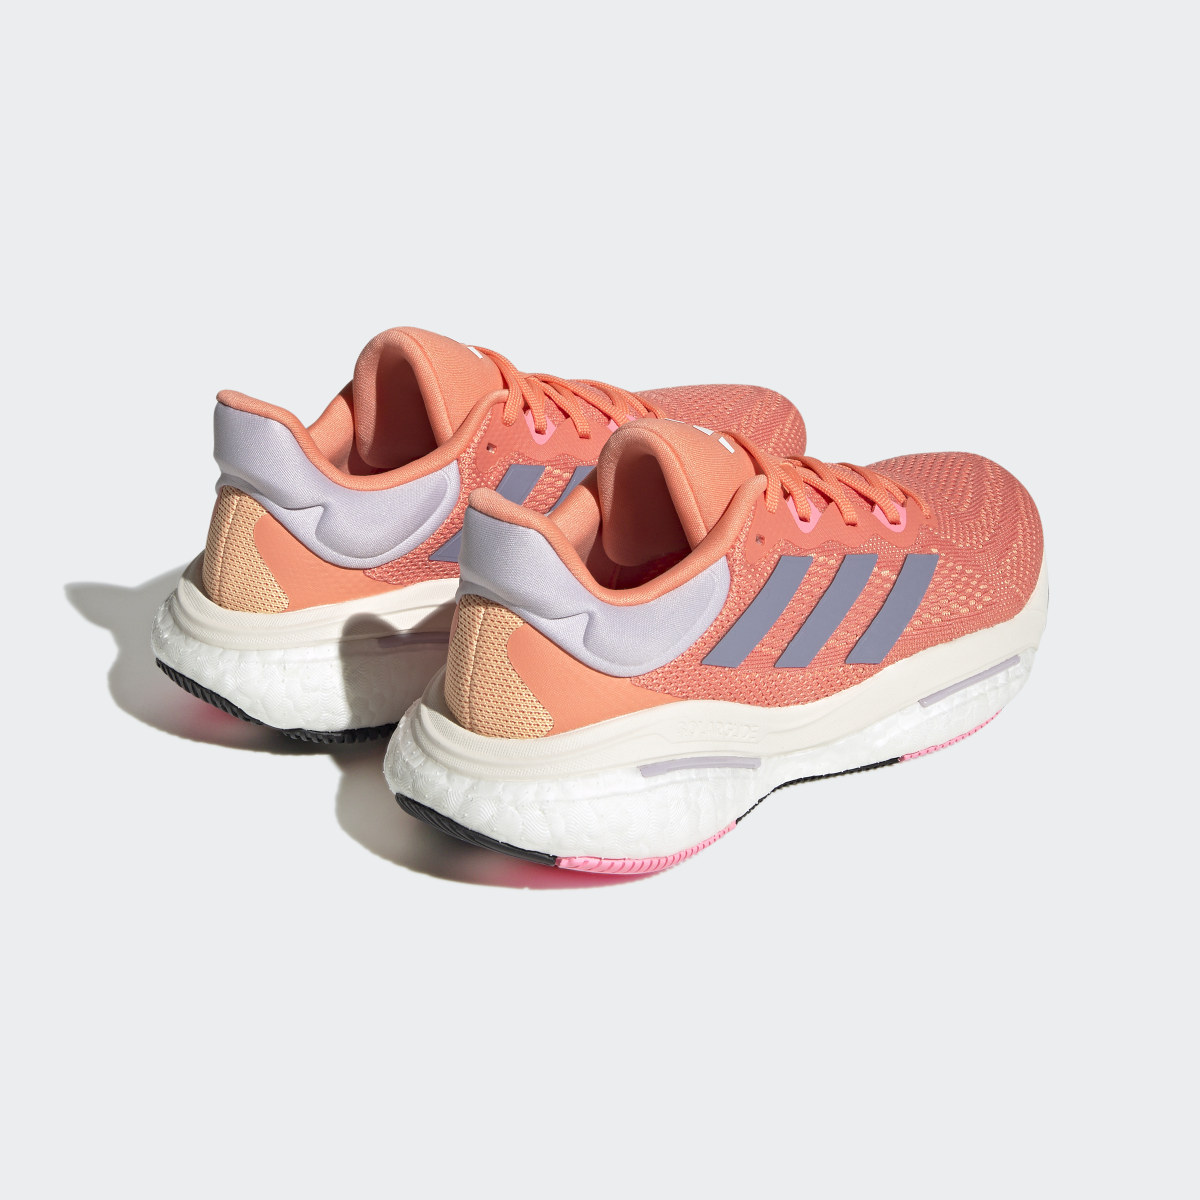 Adidas SOLARGLIDE 6 Running Shoes. 6